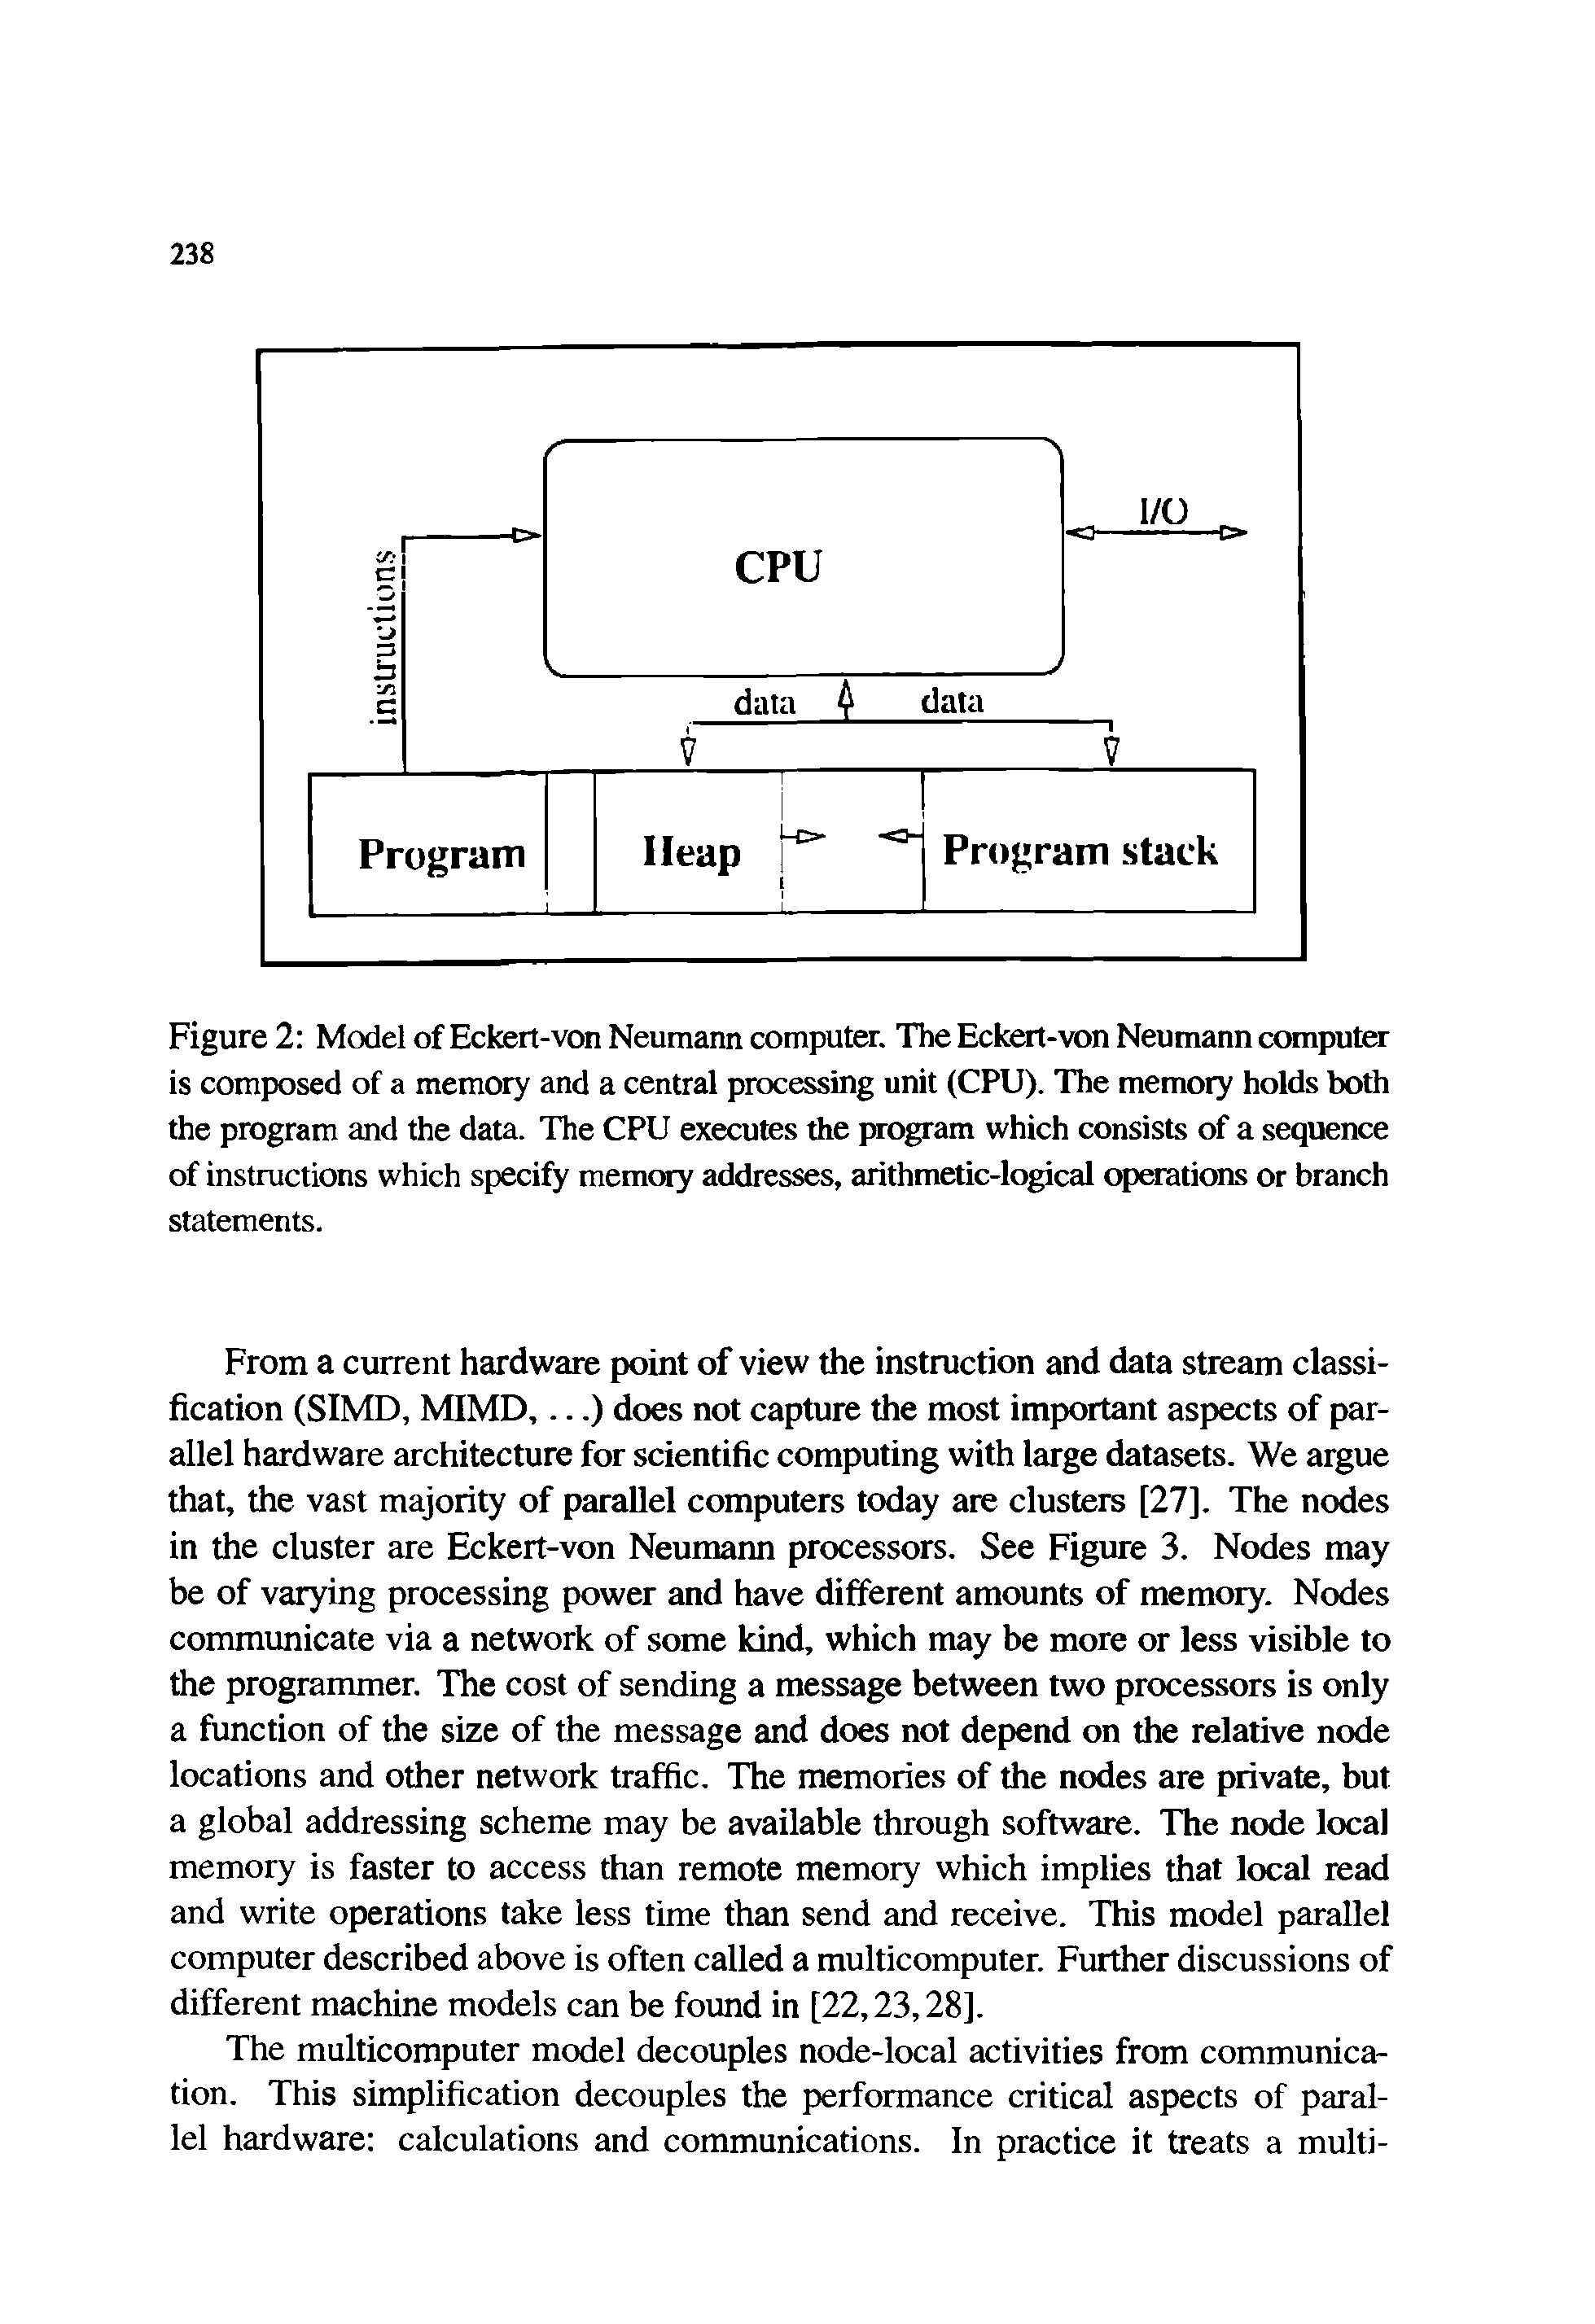 Figure 2 Model of Eckert-von Neumann computer. The Eckert-von Neumann computer is composed of a memory and a central processing unit (CPU). The memory holds both the program and the data. The CPU executes the program which consists of a sequence of instructions which specify memory addresses, arithmetic-logical operations or branch statements.